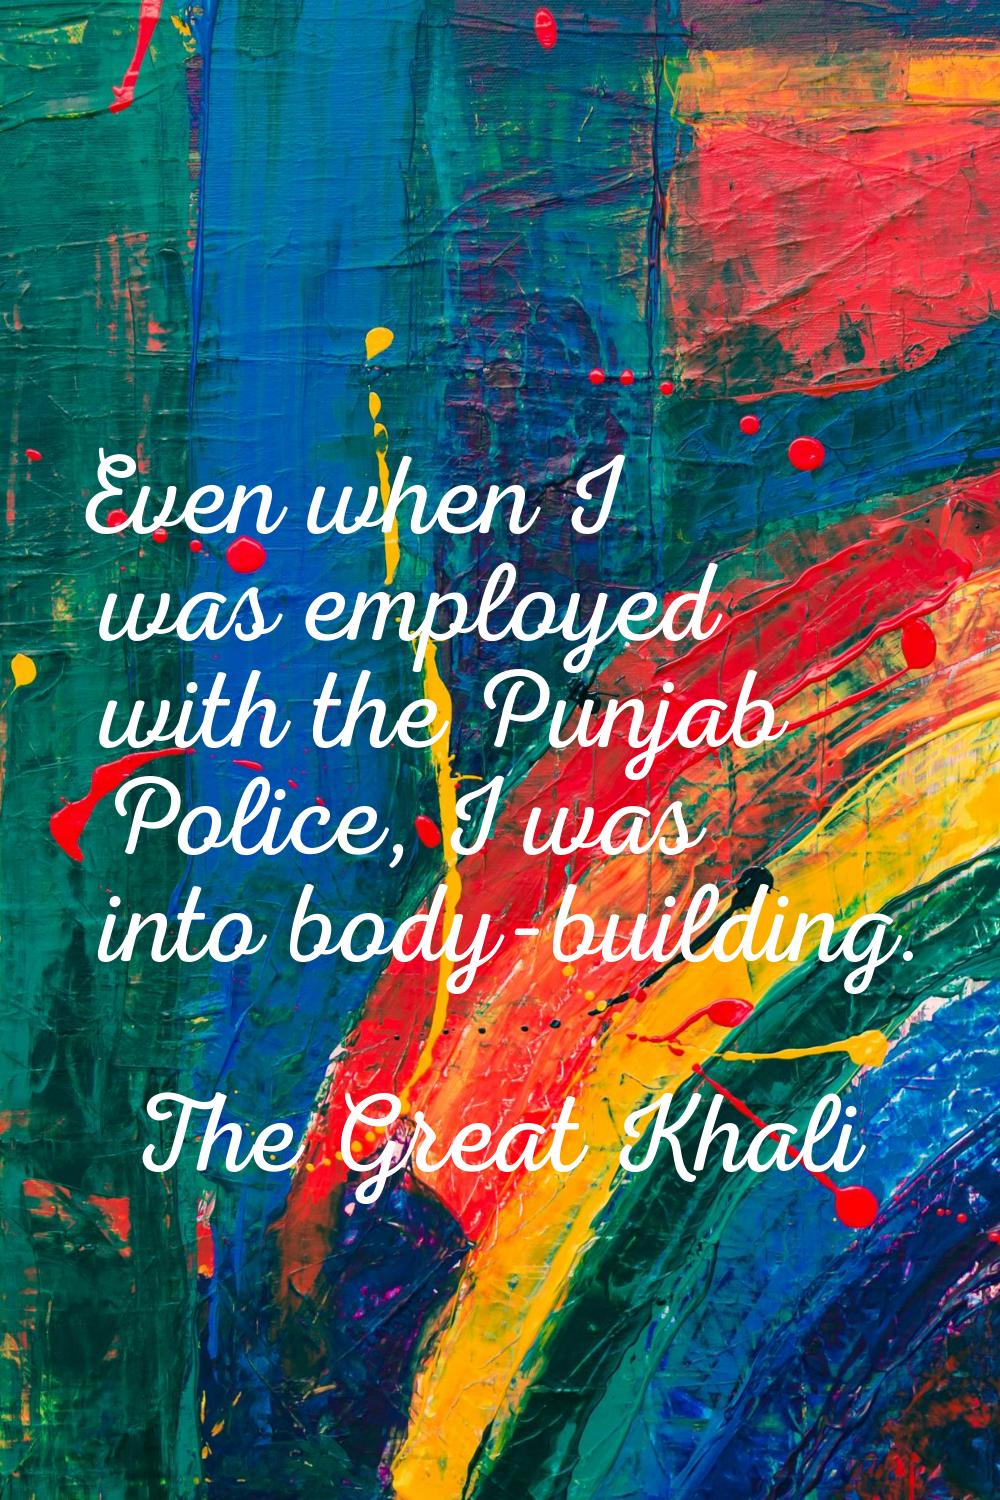 Even when I was employed with the Punjab Police, I was into body-building.